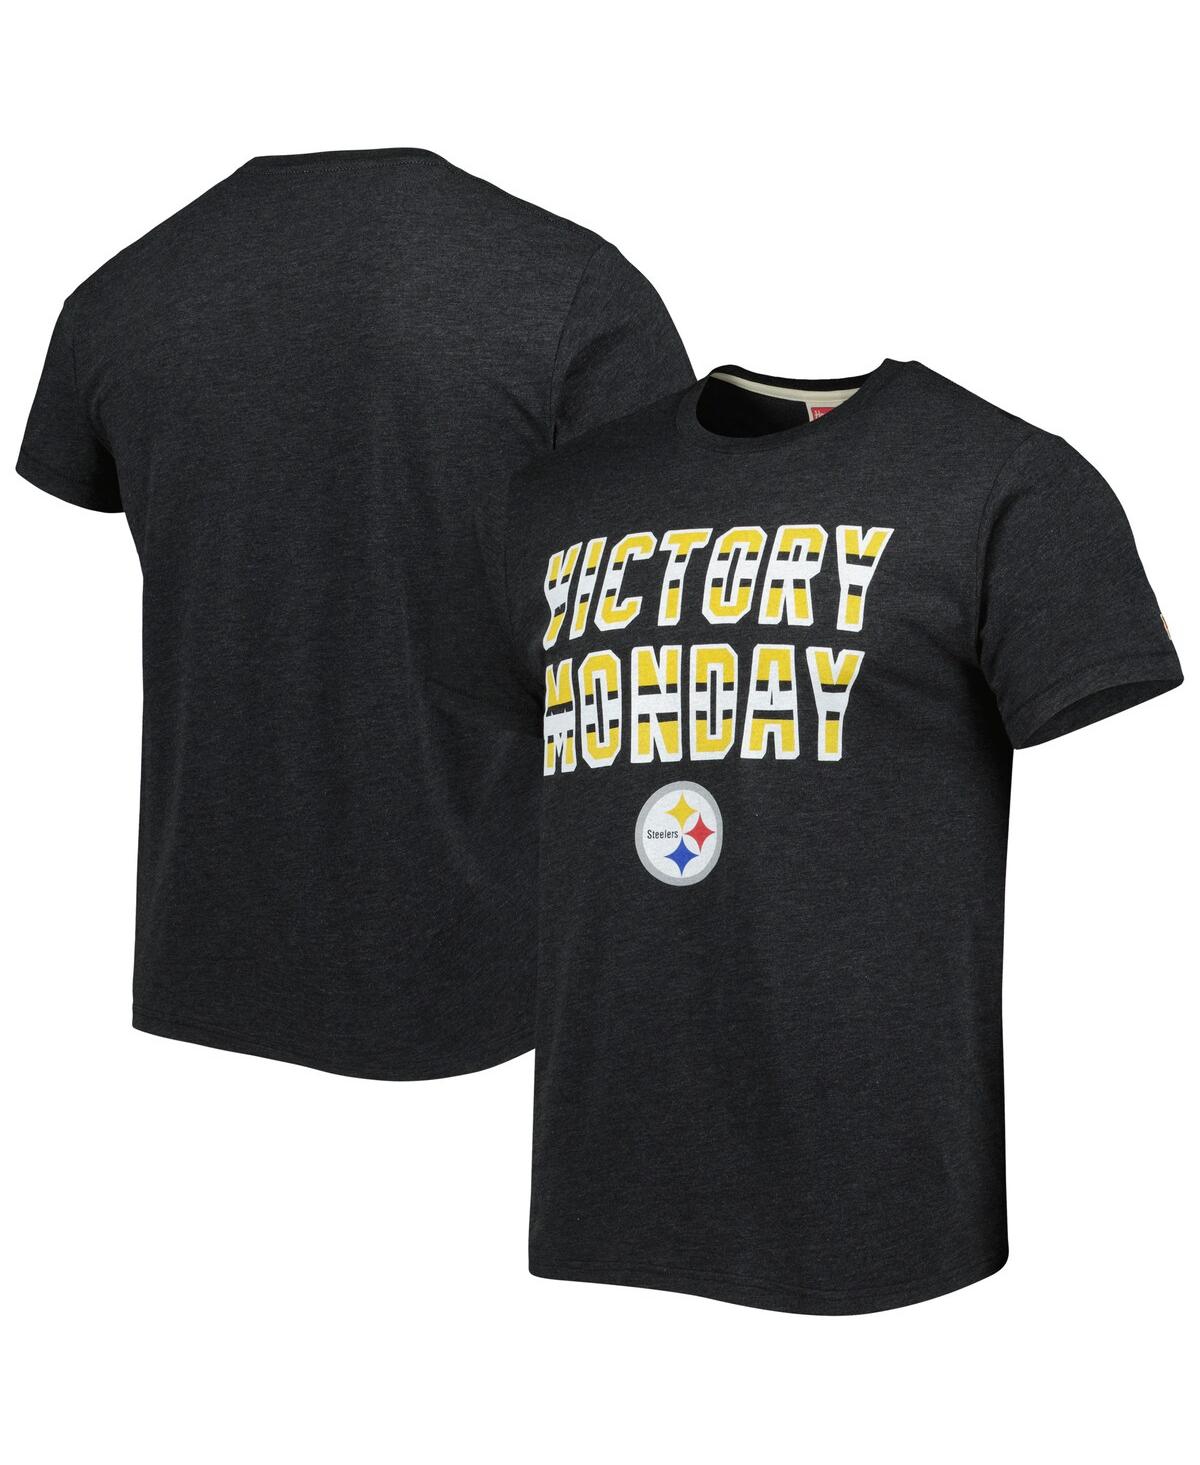 Homage Men's  Charcoal Pittsburgh Steelers Victory Monday Tri-blend T-shirt